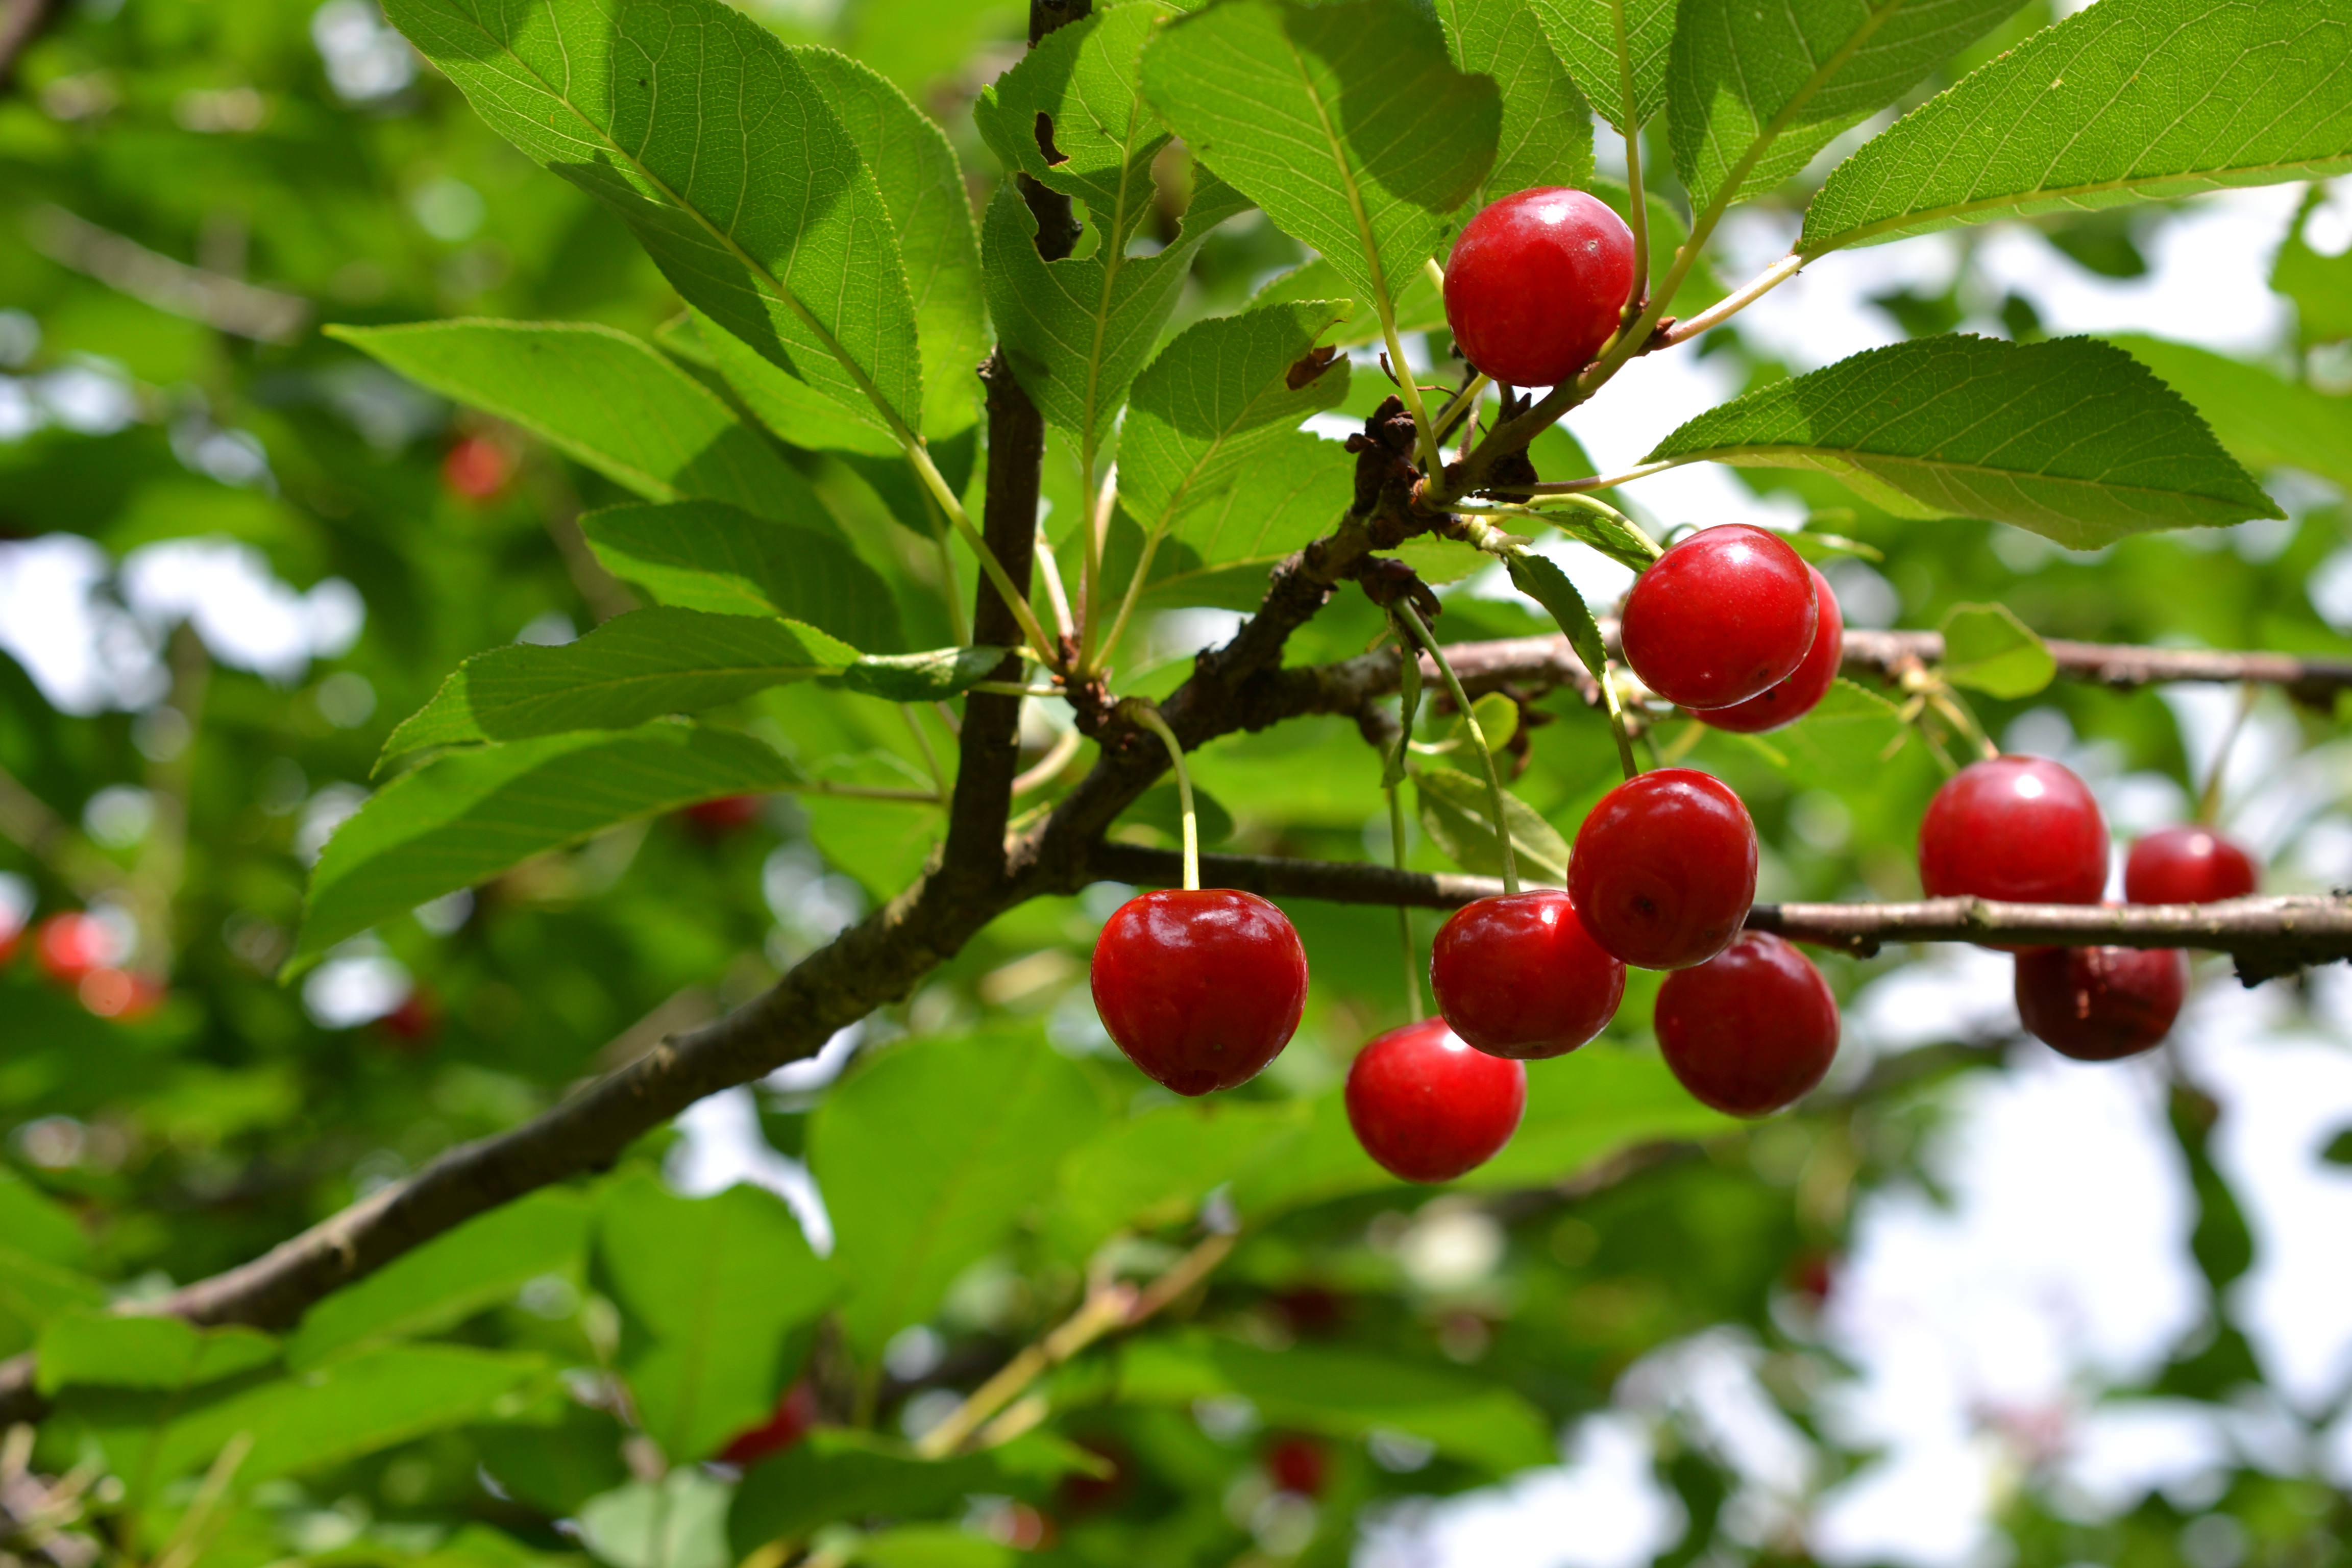 143771 download wallpaper fruit, food, cherry, wood, tree, branch screensavers and pictures for free